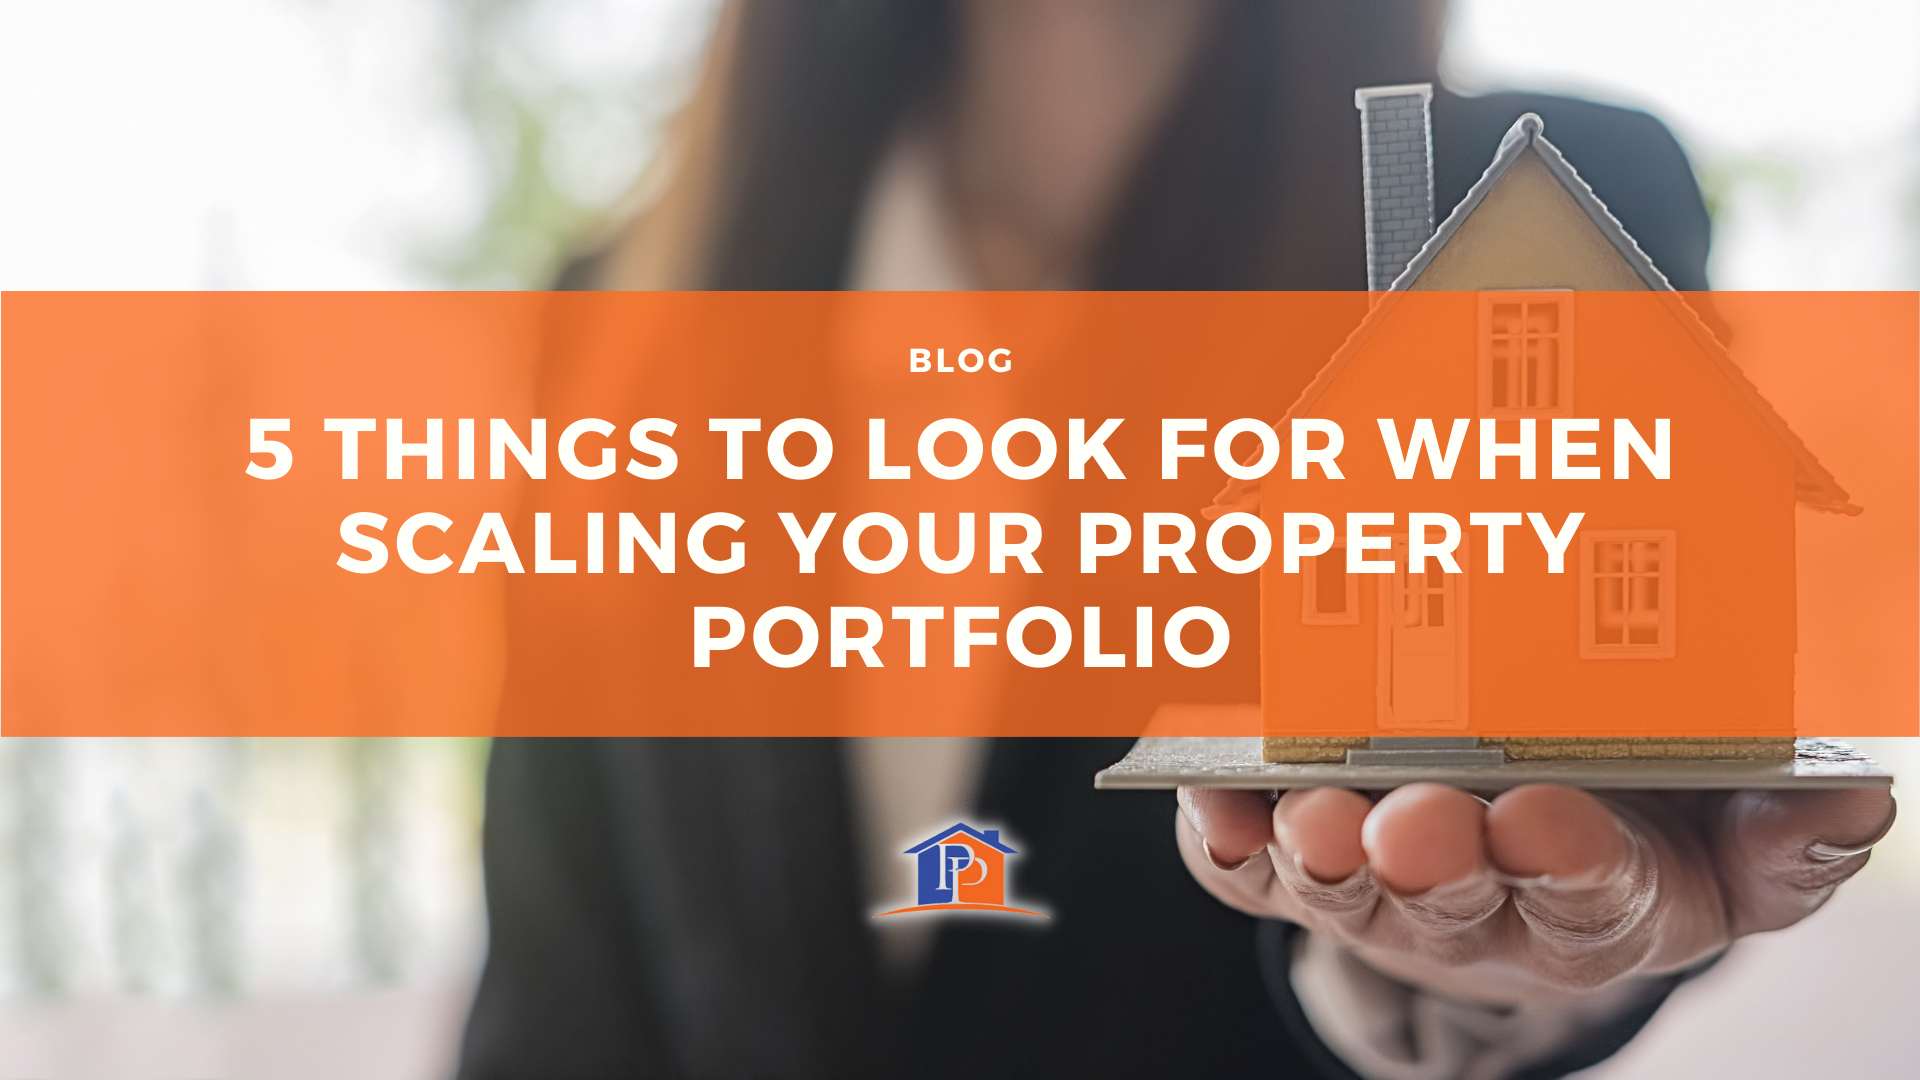 5 Things to Look for When Scaling Your Property Portfolio